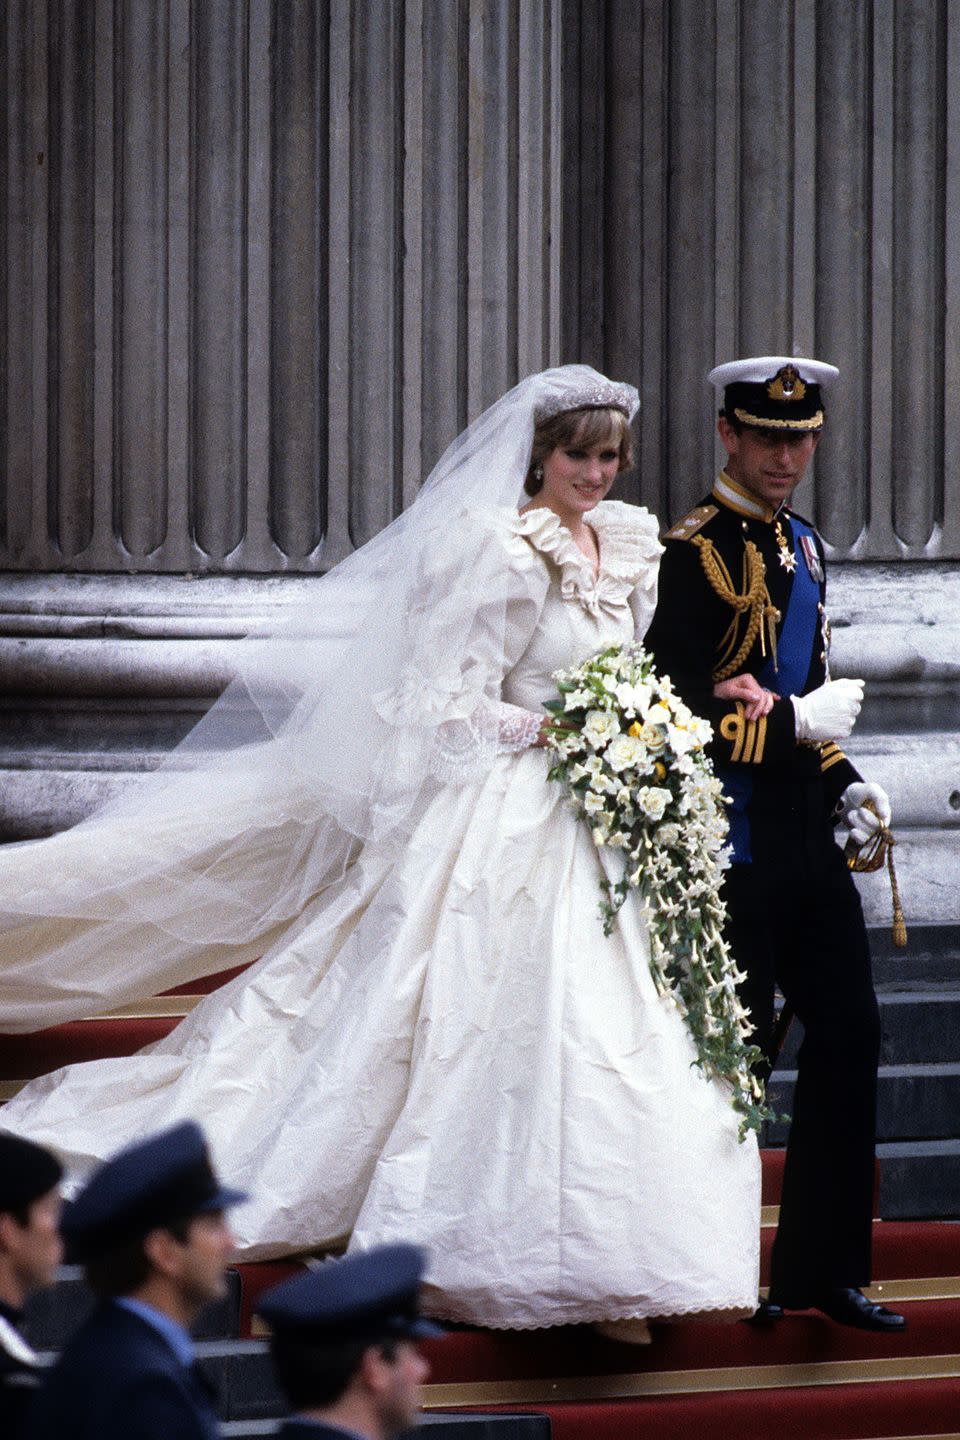 7) Diana was sewn into her dress.